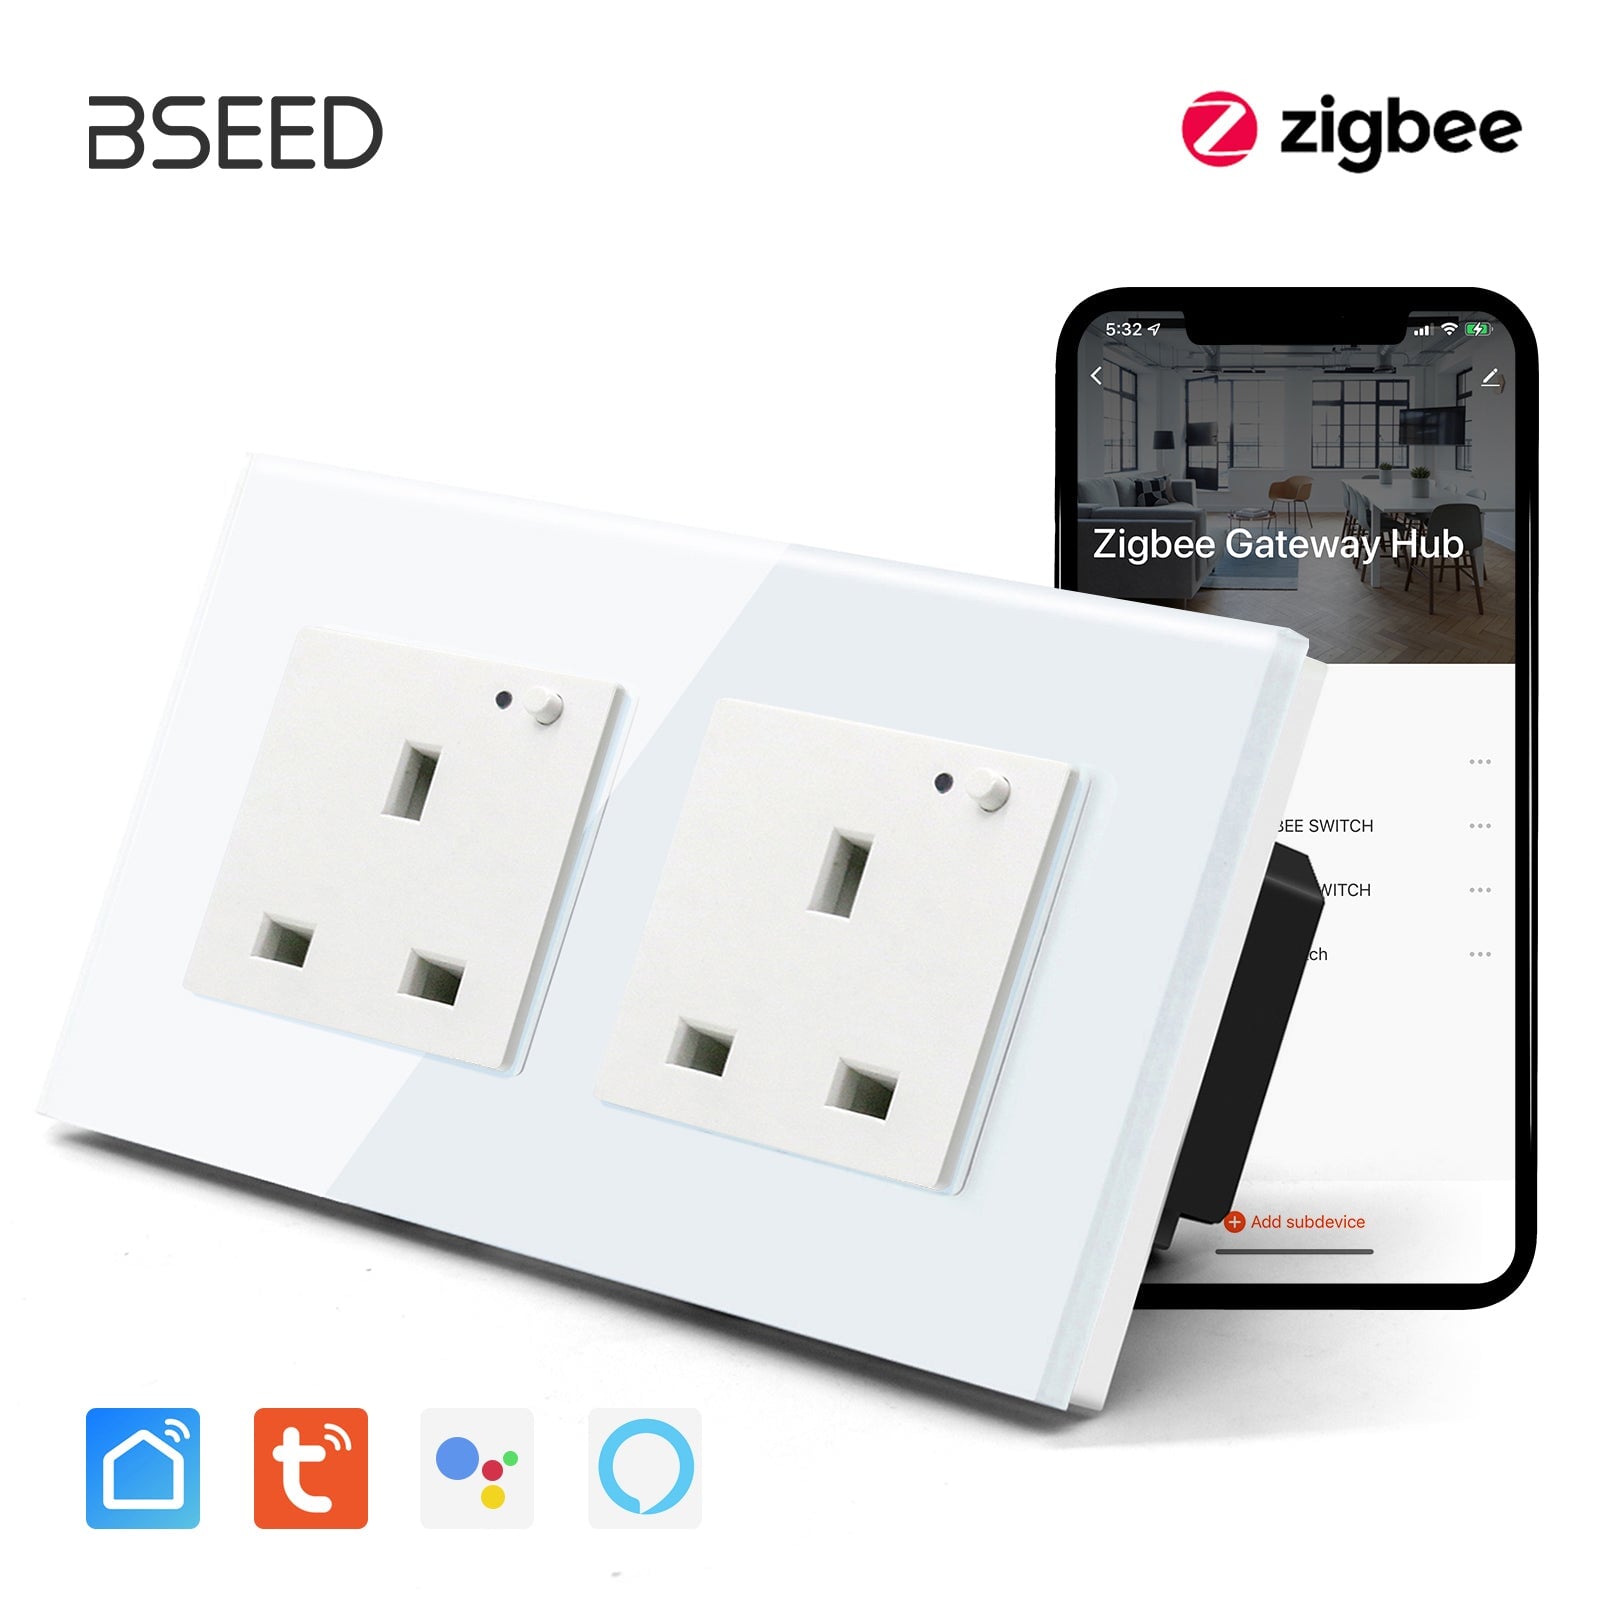 BSEED ZigBee UK Wall Sockets Power Outlets Kids Protection Wall Plates & Covers Bseedswitch white Double 